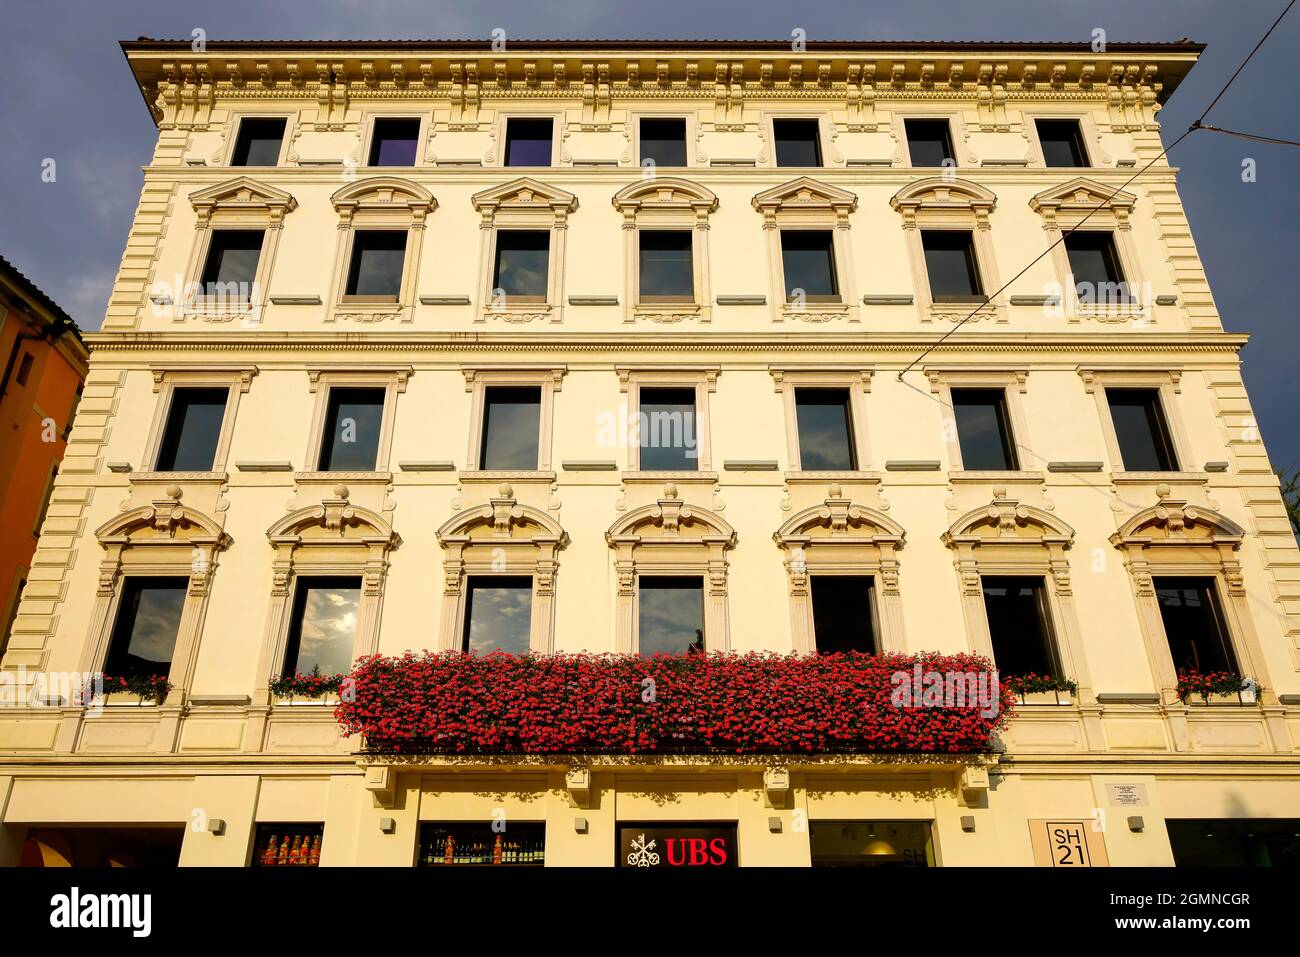 UBS SA building by Piazza Riforma in Lugano, Canton of Ticino. Switzerland. Stock Photo